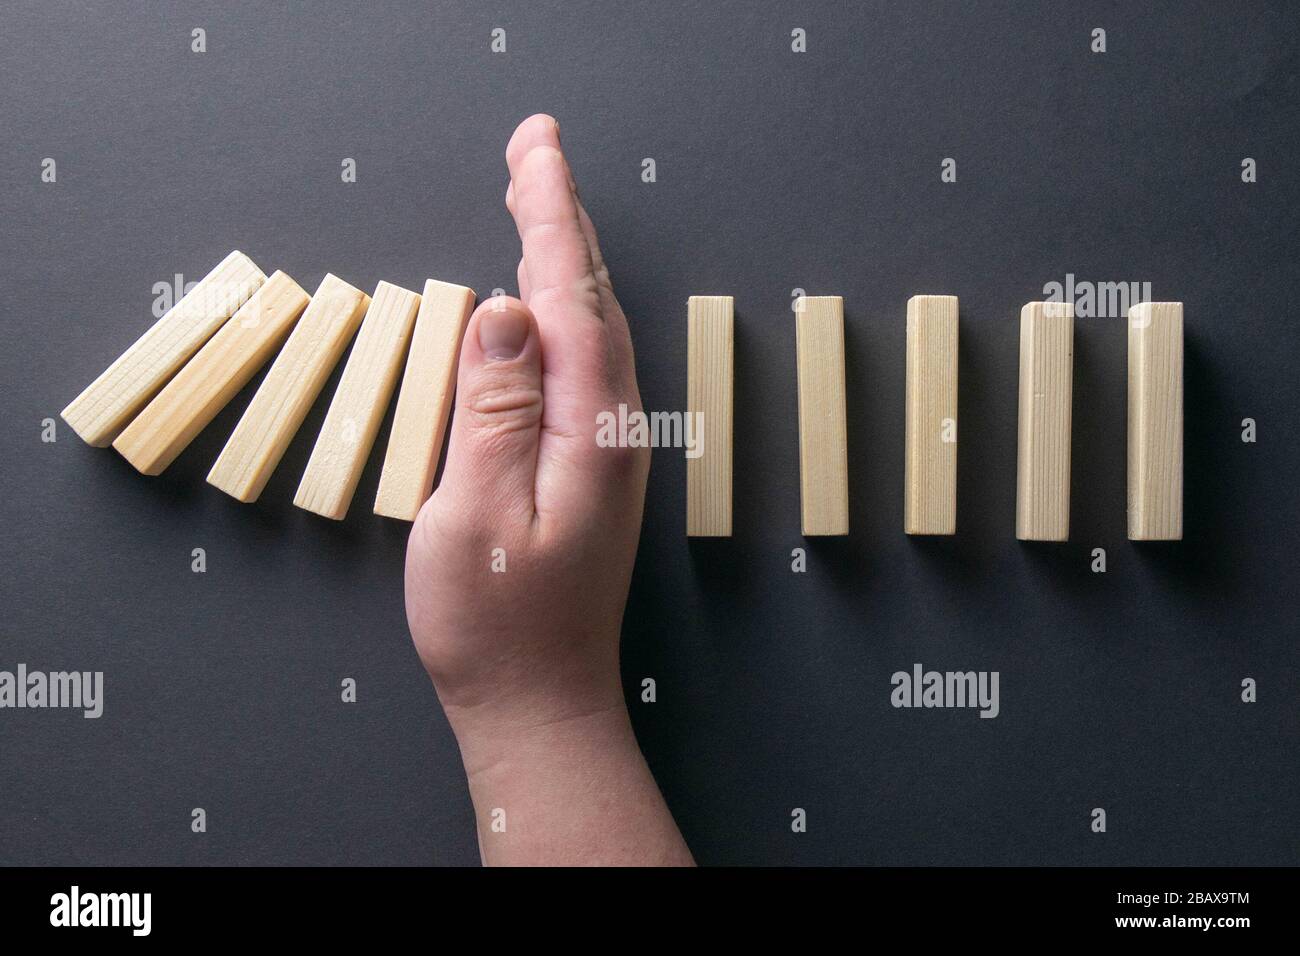 Top view man hand stopping falling dominos in a business crisis management conceptual image Stock Photo